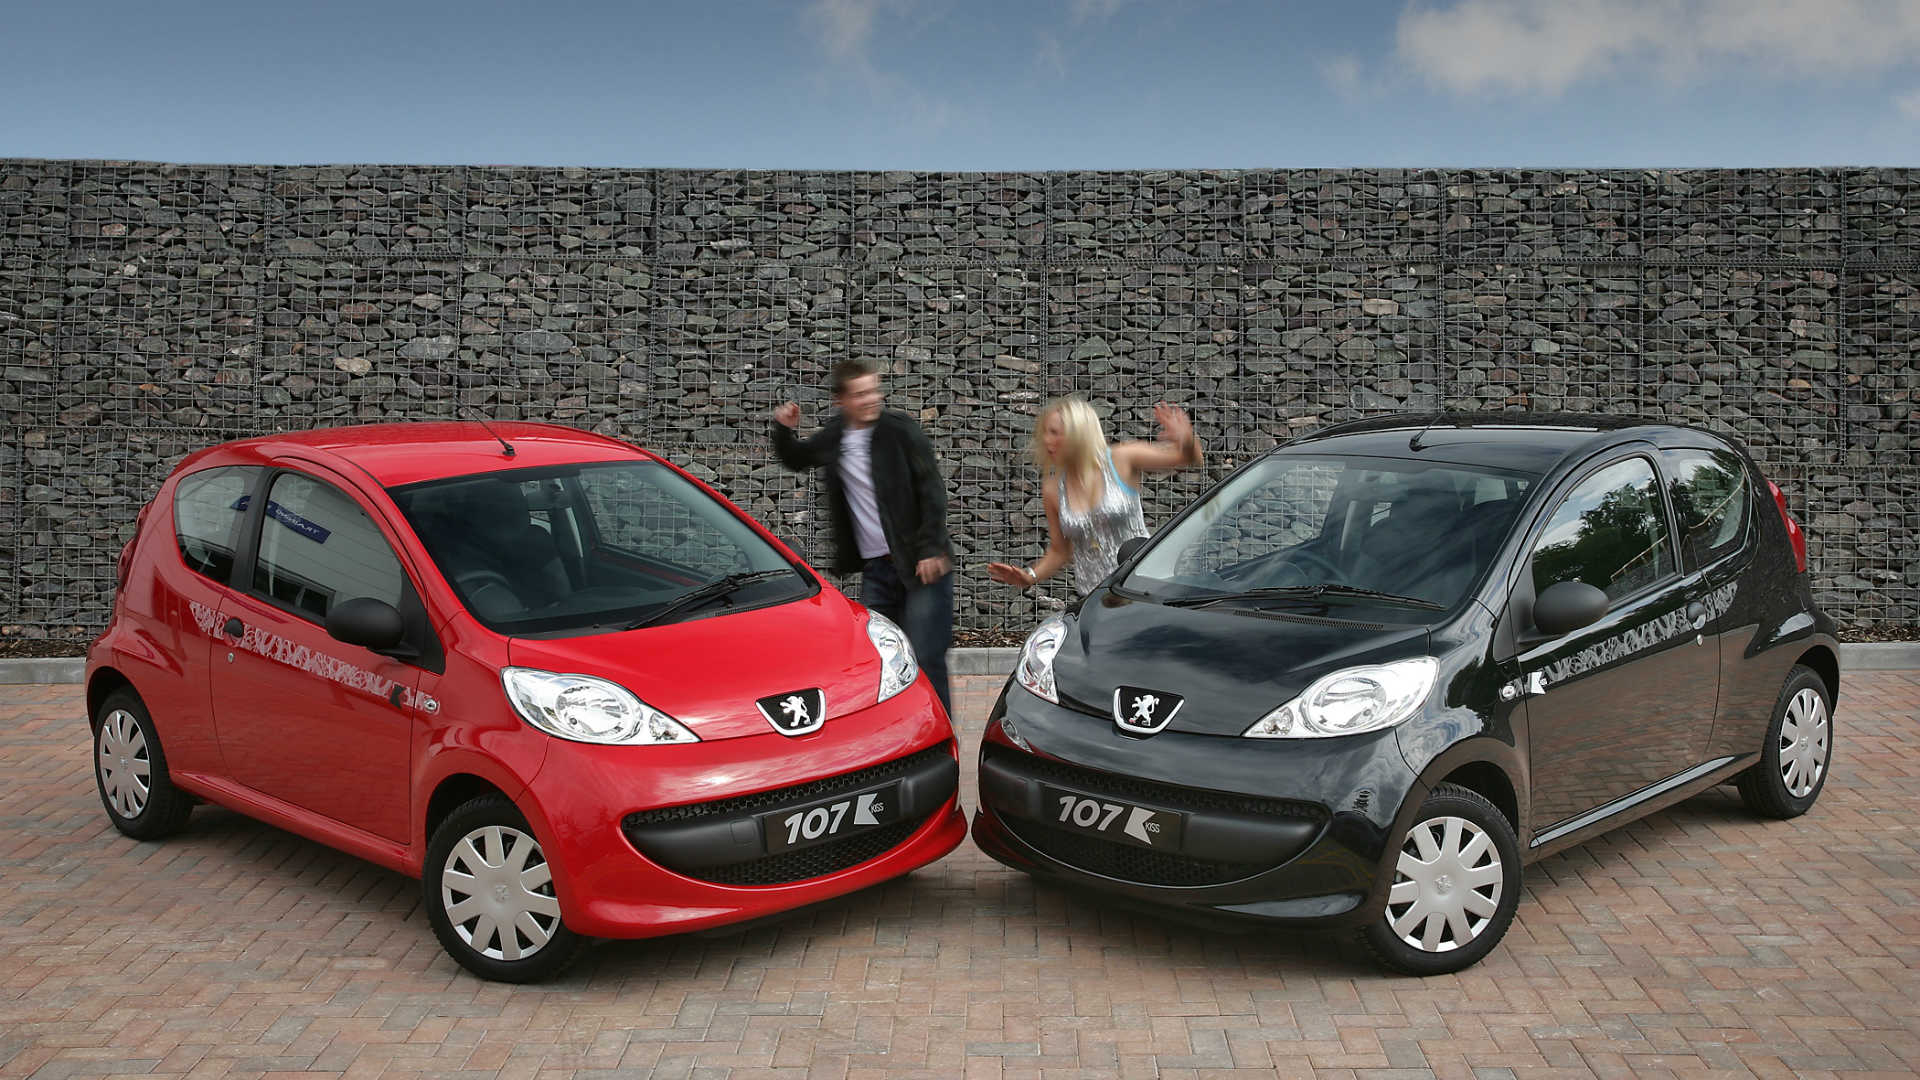 The 10 Cheapest Cars For 17 Year Olds To Insure Motoring intended for proportions 1920 X 1080